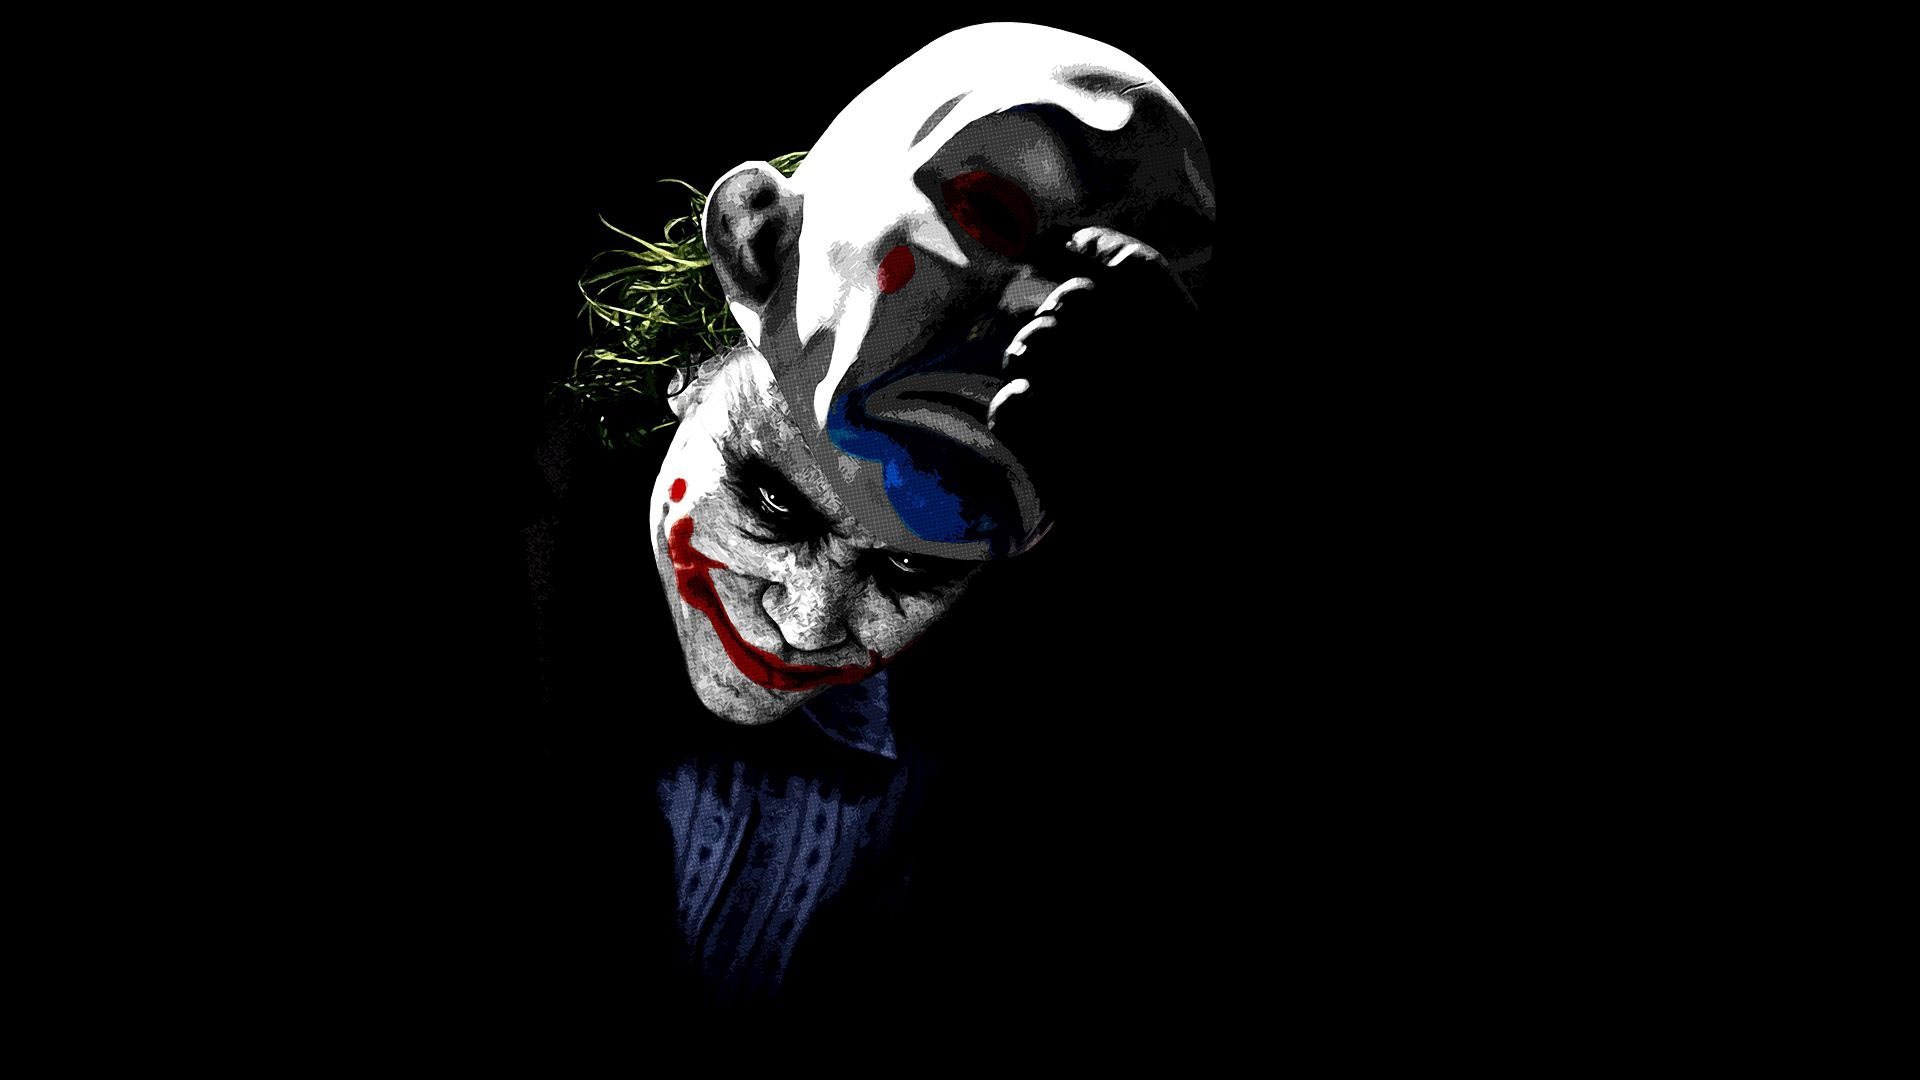 1920x1080 ... Awesome Joker Quotes Dark Knight Wallpaper of awesome full screen HD  wallpapers to download for free